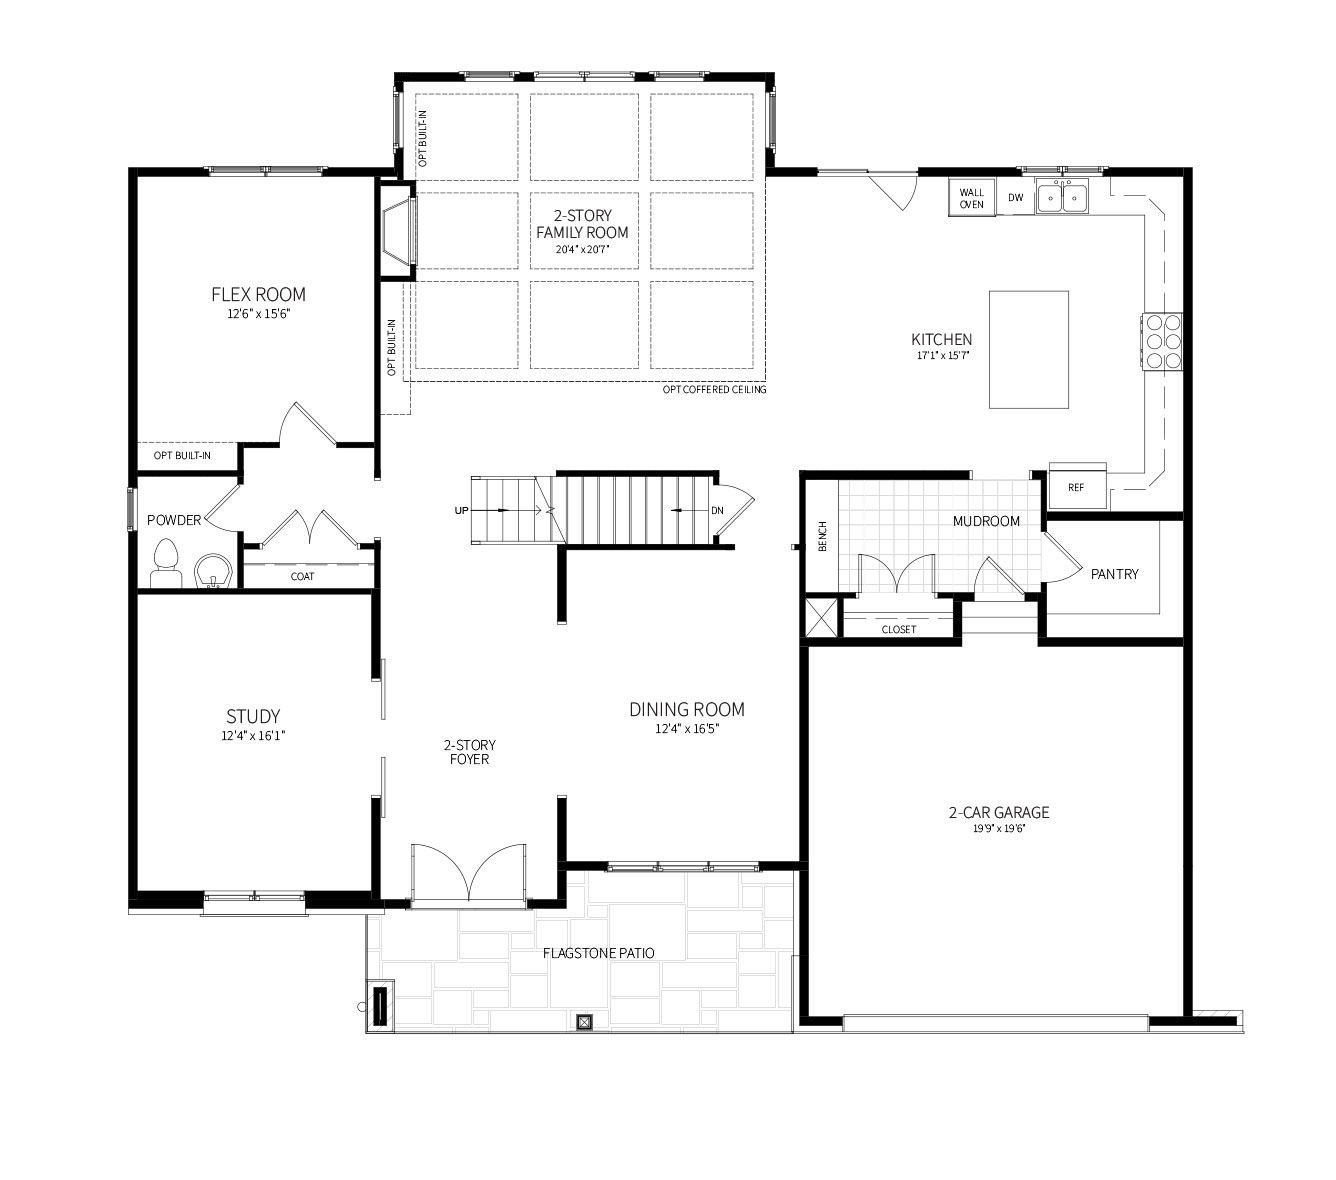 The first floor plan for the Hampden model home, an updated center hall colonial layout.